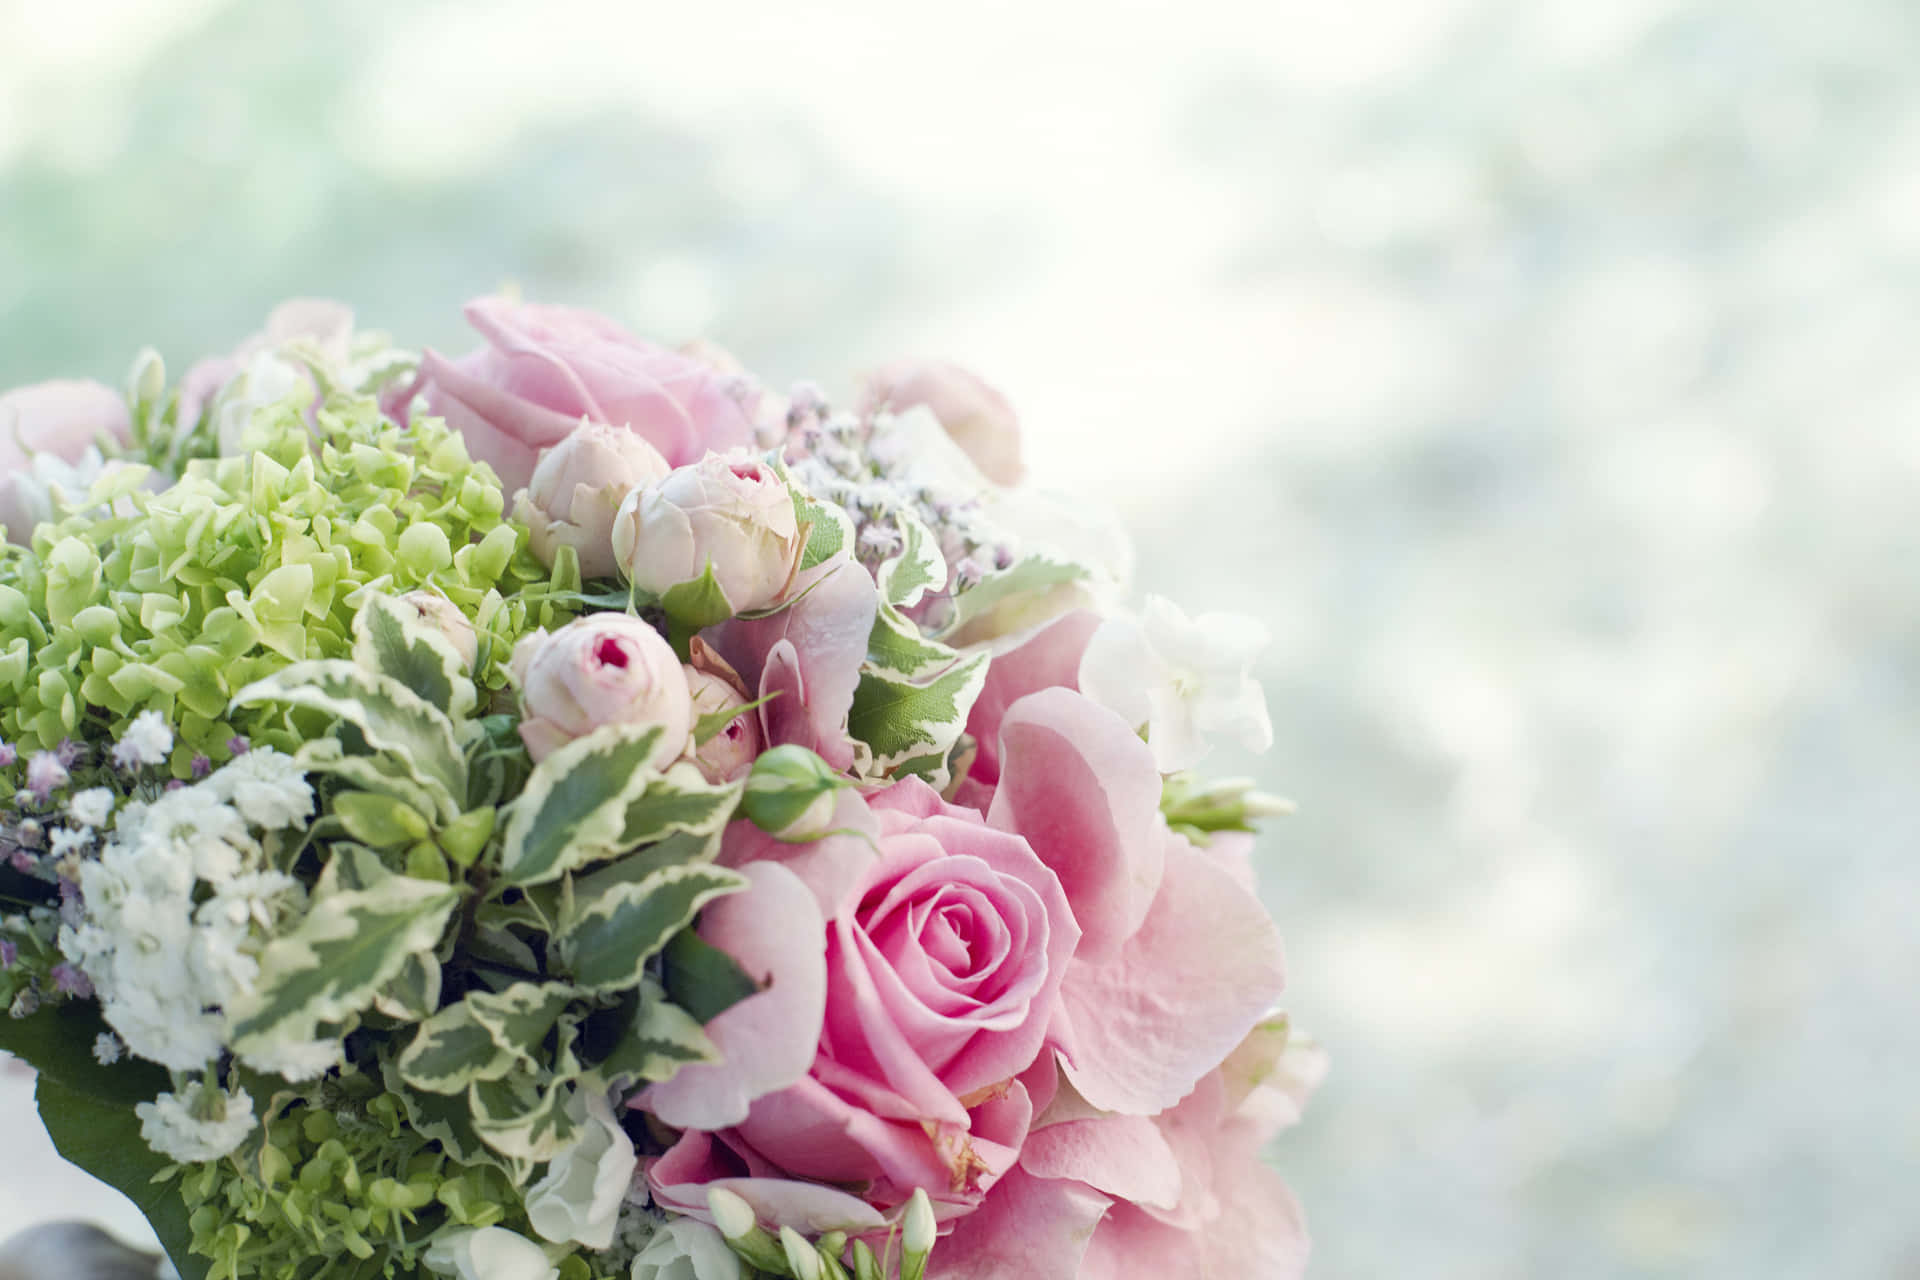 Wedding Bouquet with Roses and Greenery Wallpaper